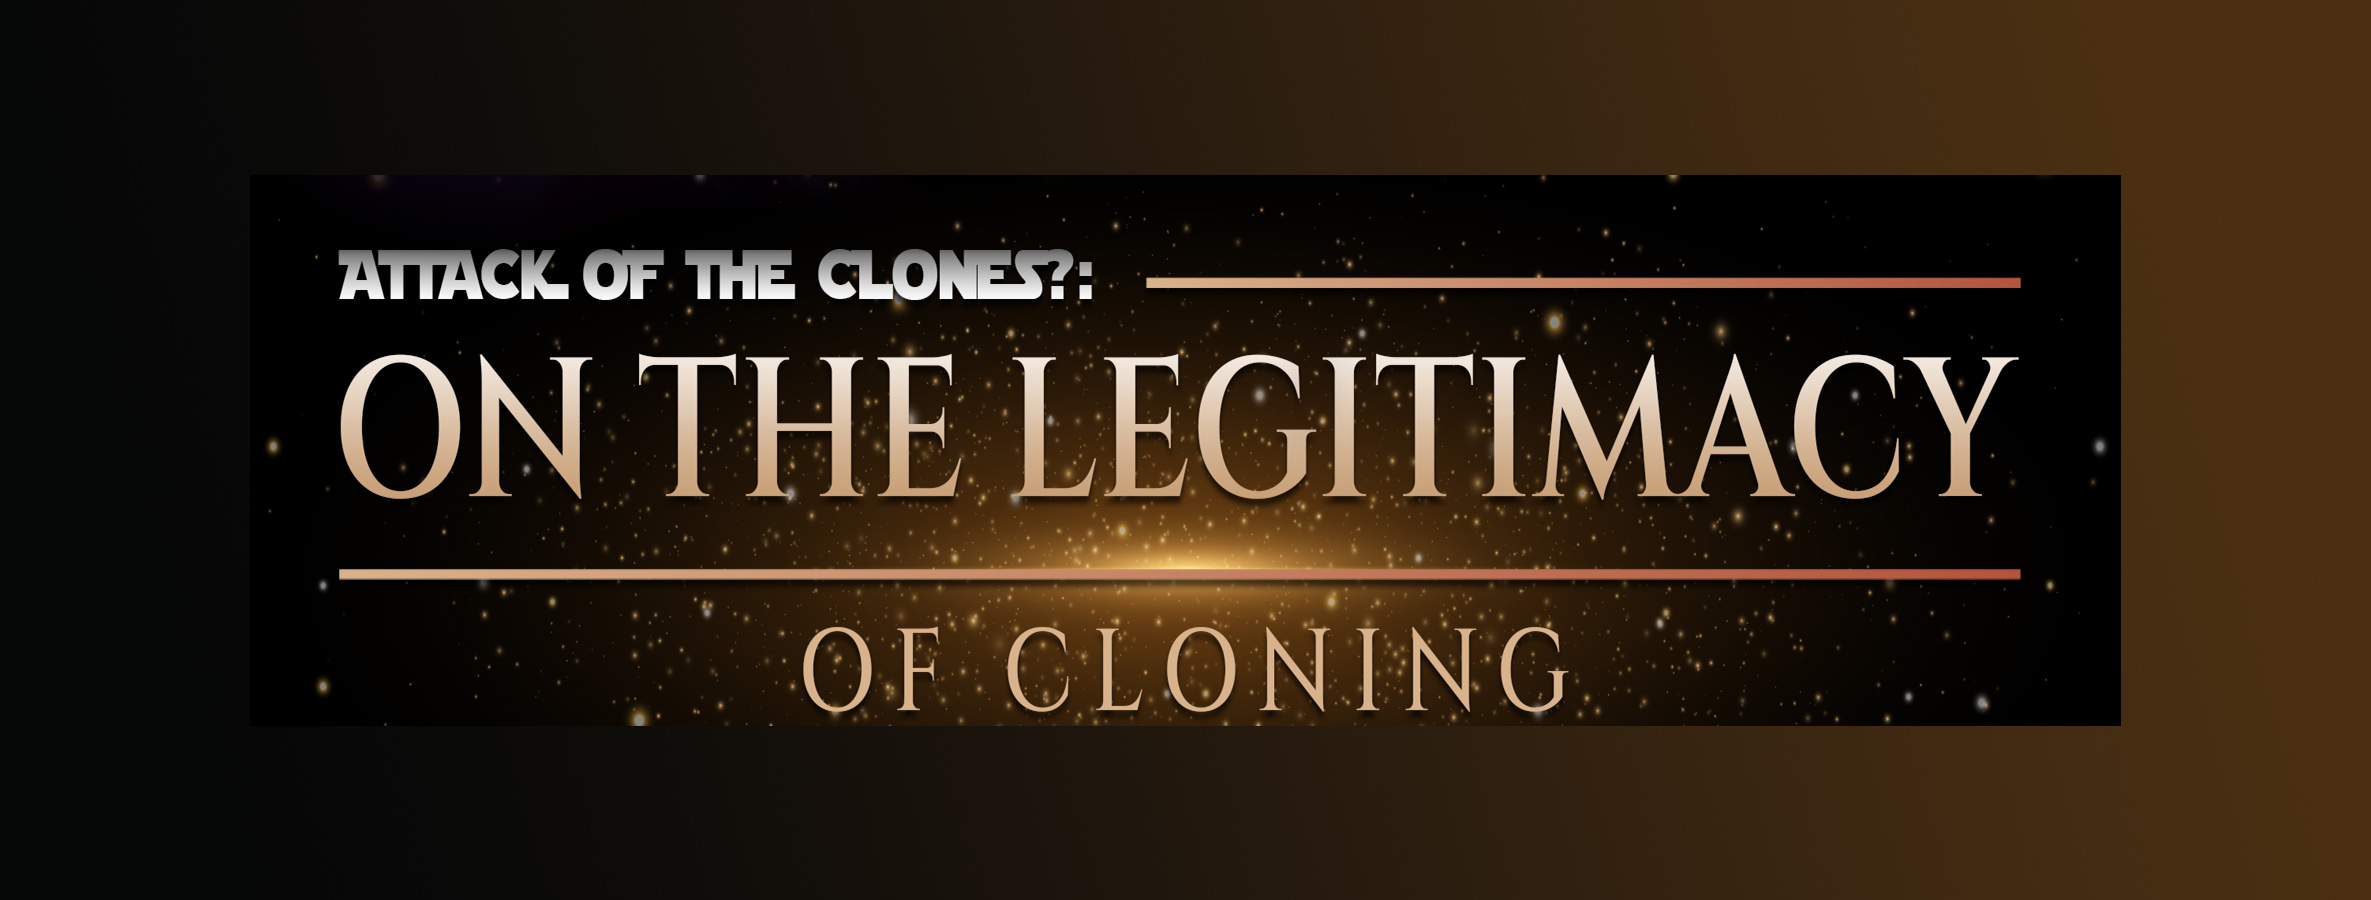 Feddie Night Fights: Attack of the Clones? On the Legitimacy of Cloning